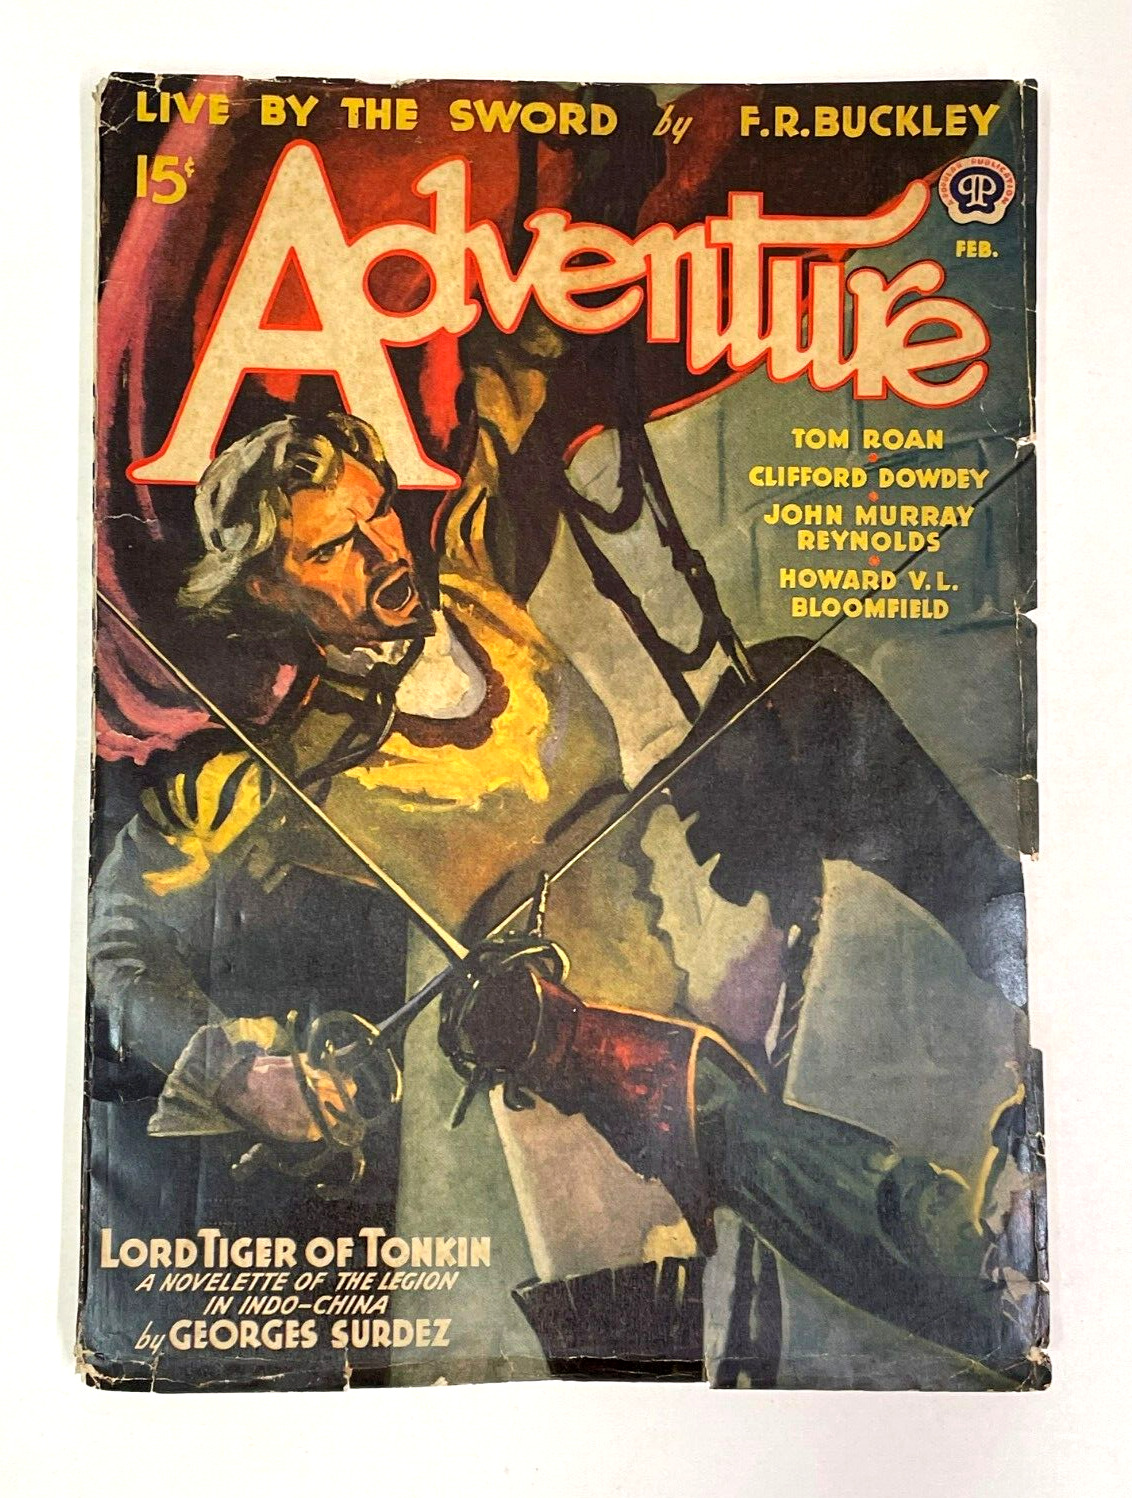 VINTAGE Adventure pulp magazine (February 1942) VG+ Live by the Sword, complete